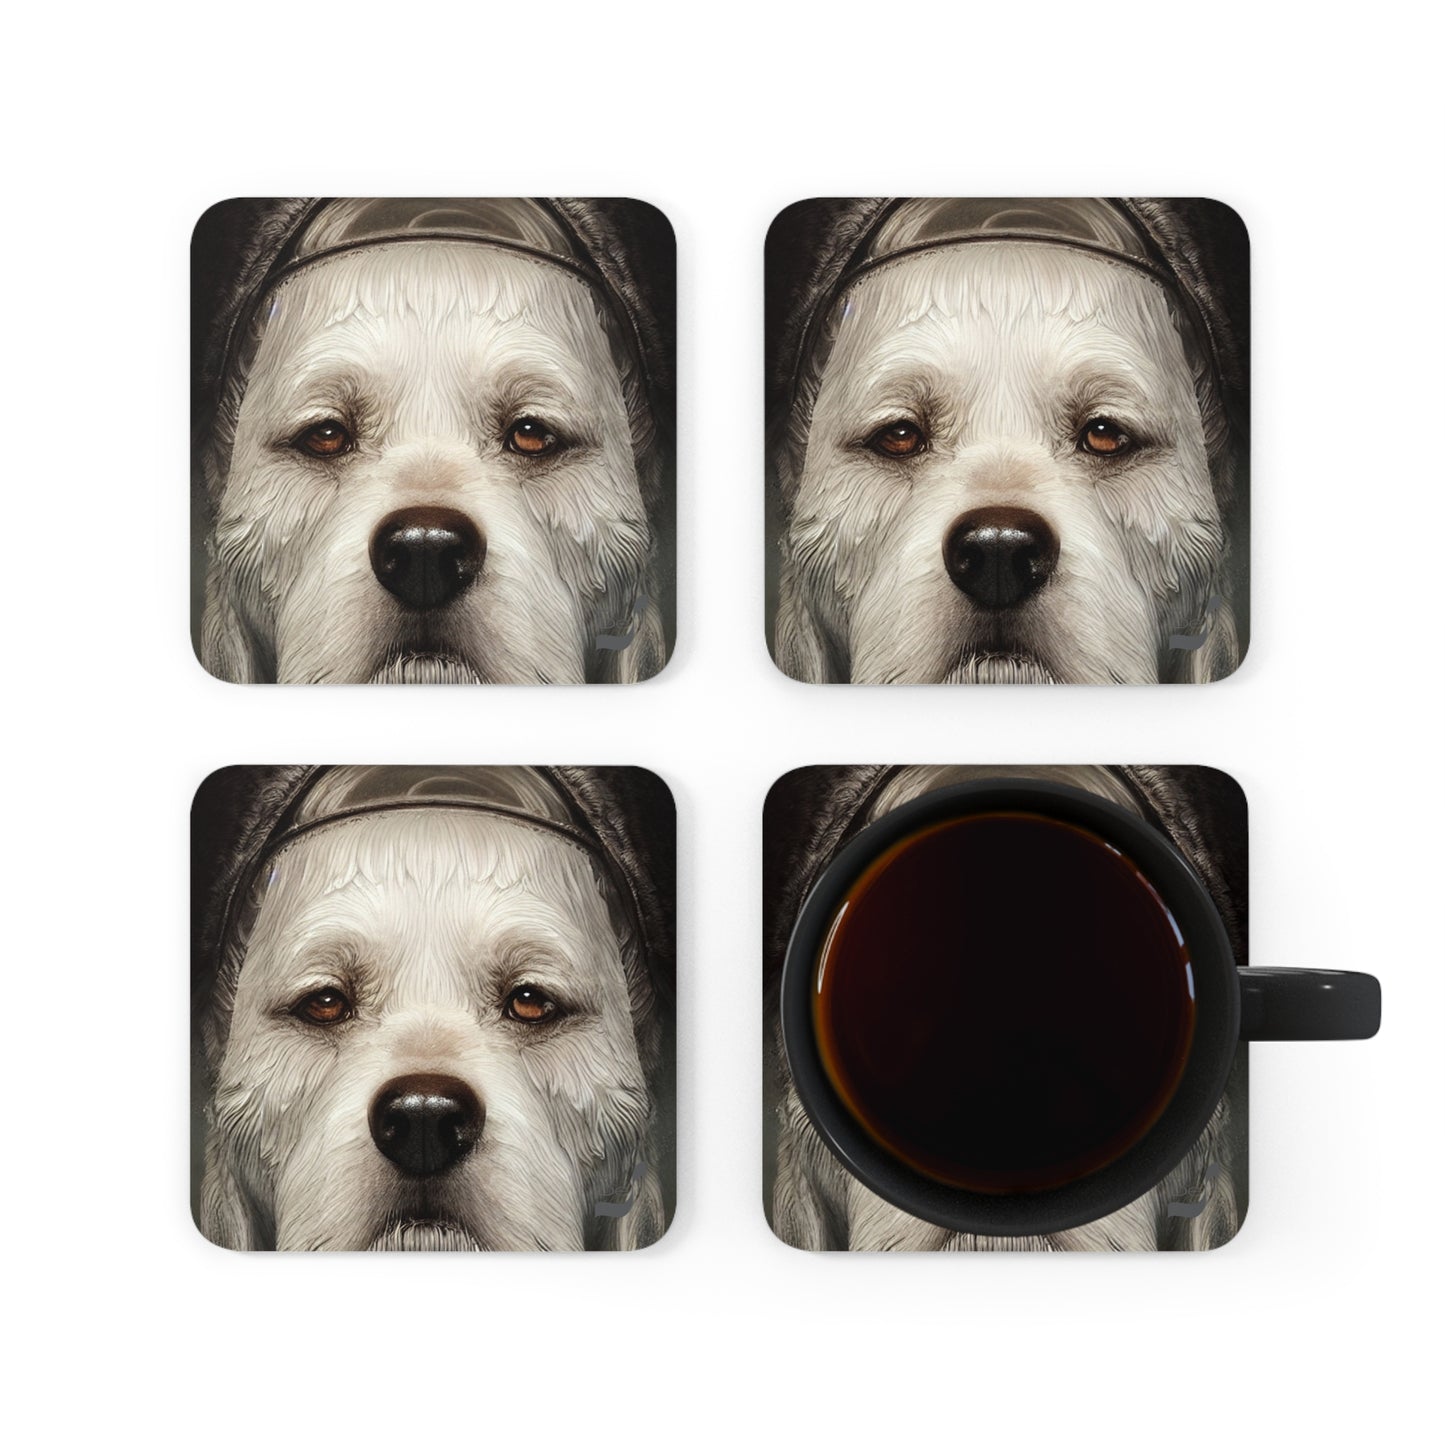 Are You Looking At Me BeSculpt Corkwood Coaster Set of 4